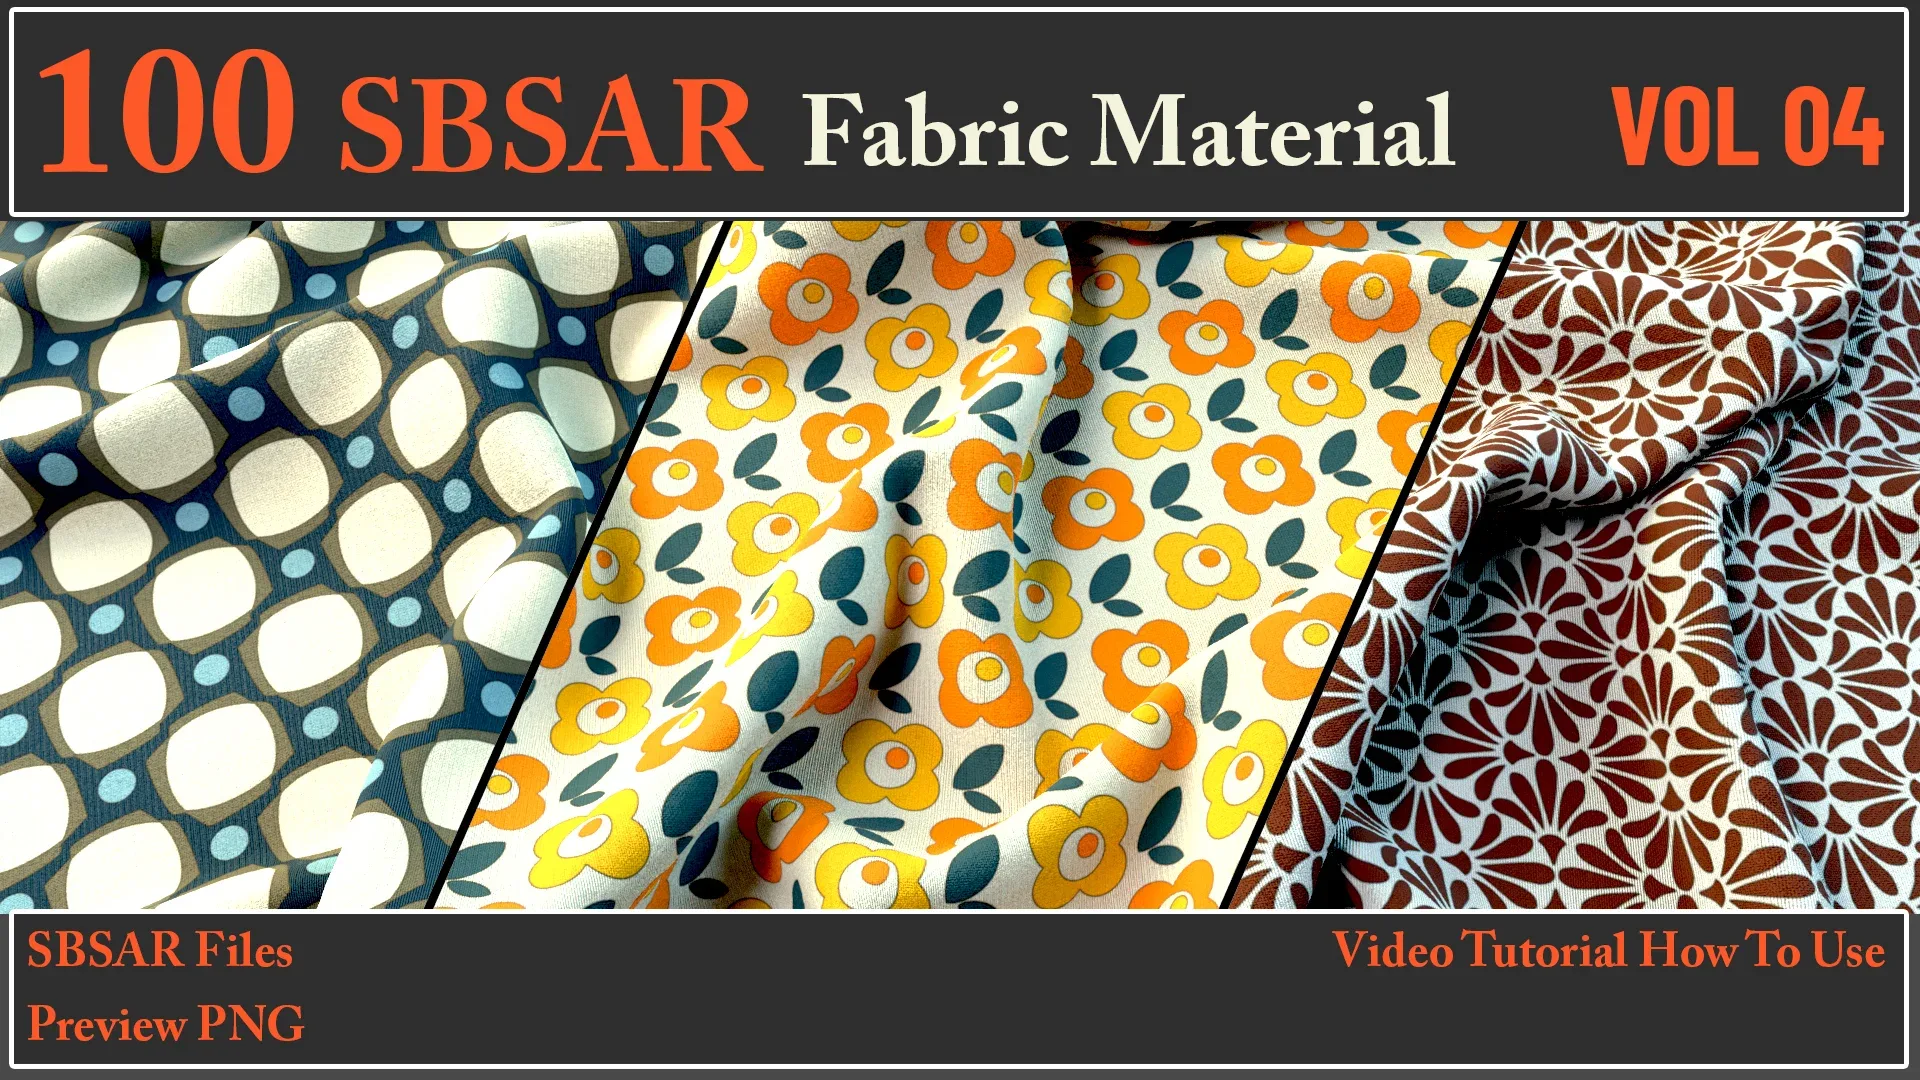 100 SBSAR Files Fabric Materials VOL 04 + Video How To Use